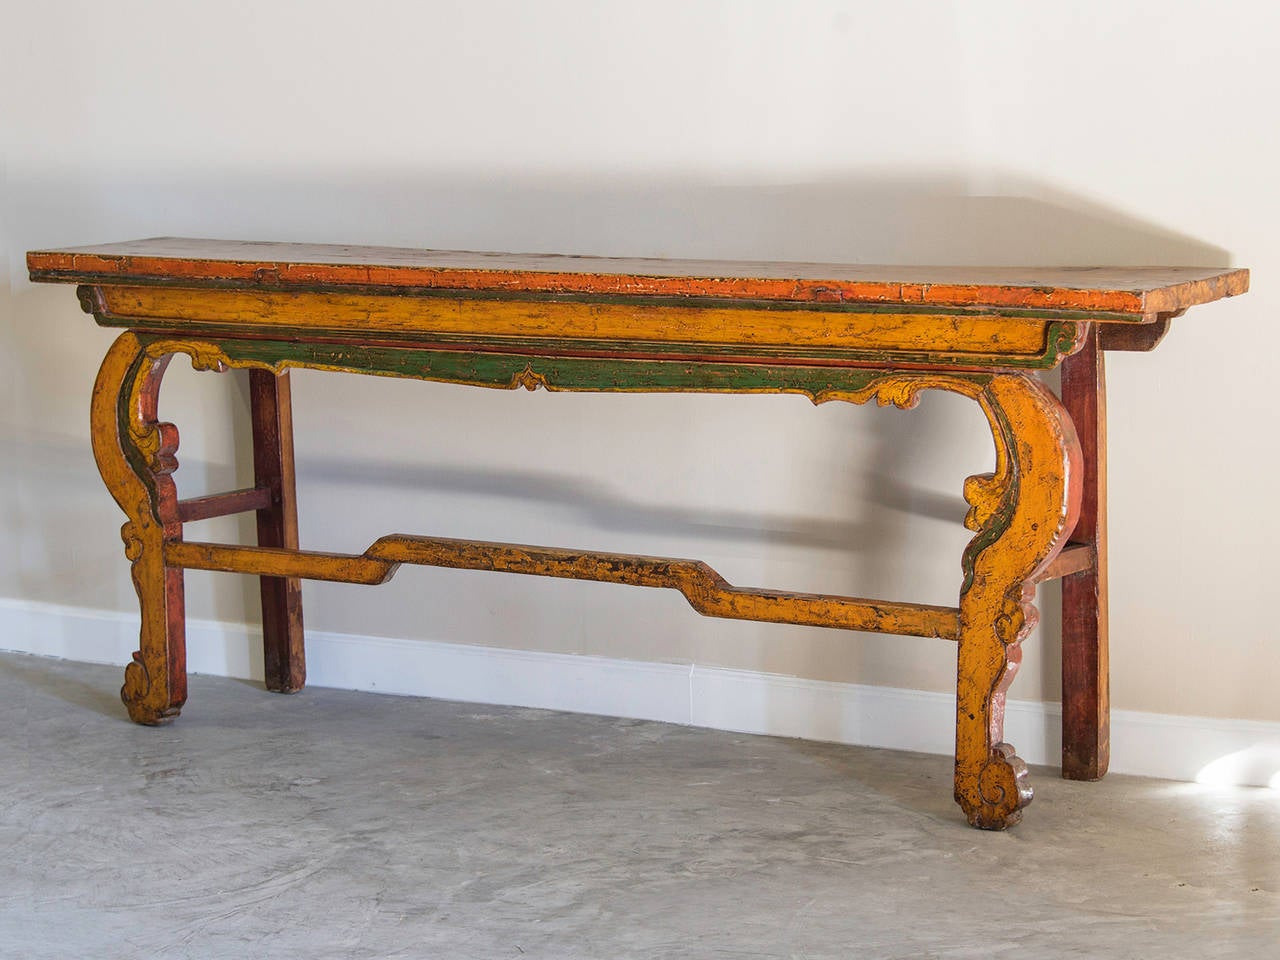 Painted and Carved Altar Table, Yunnan Province, China c.1890. The brilliant colours of yellow, green and red seen here correspond to specific attributes in Chinese culture as well as the Buddhist religion which spread northward from Tibet. Given